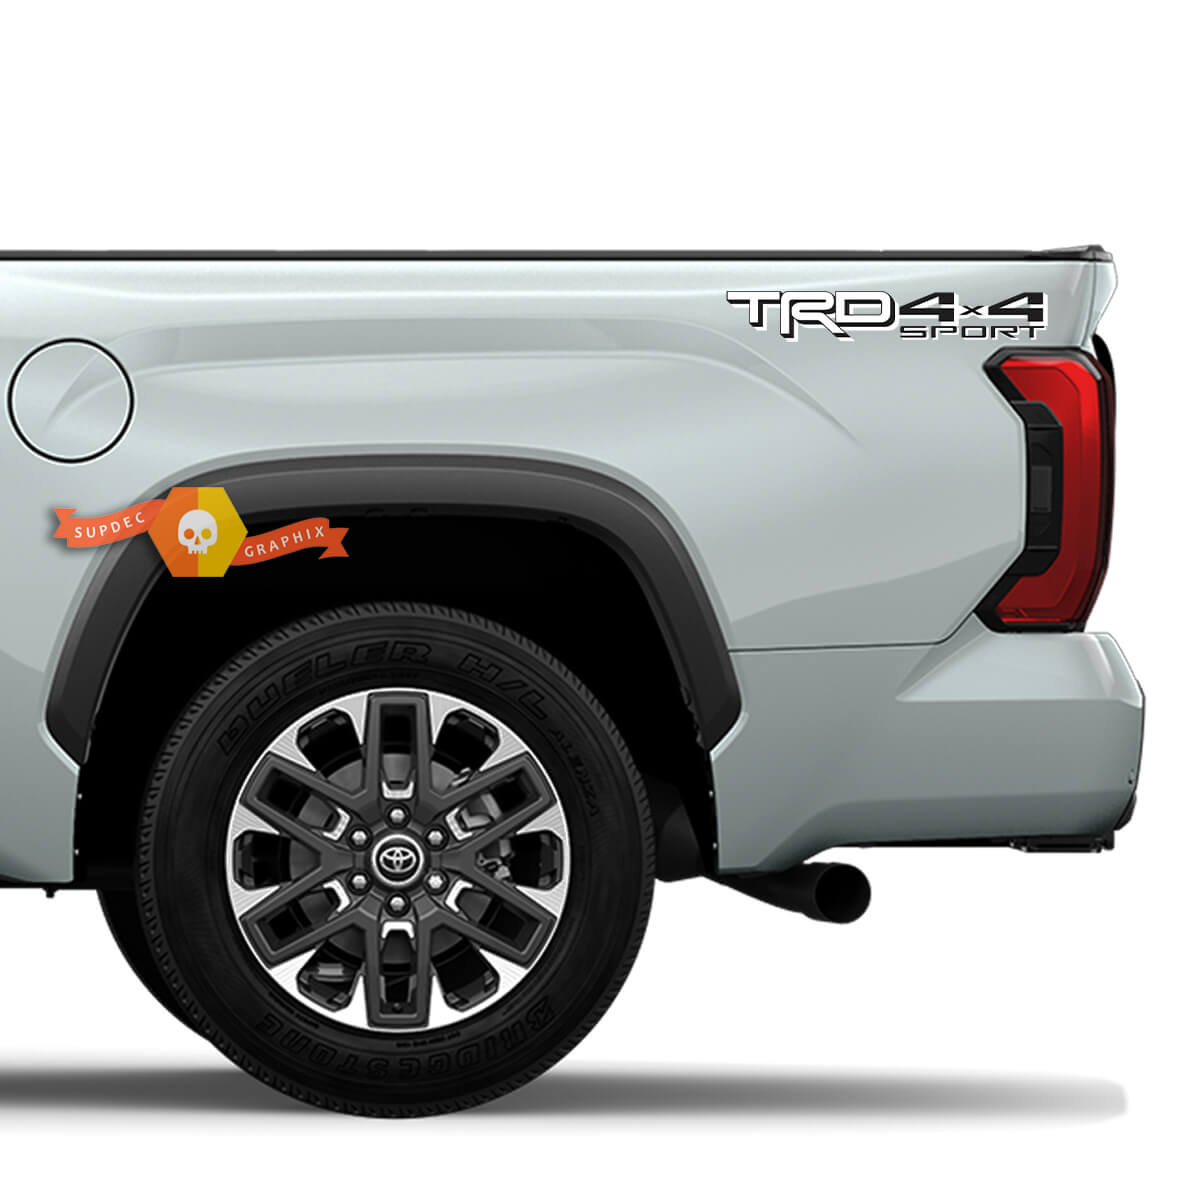 2 New side Toyota TRD Truck Off Road 4x4 Toyota Racing Tacoma Tundra Decal Vinyl Sticker